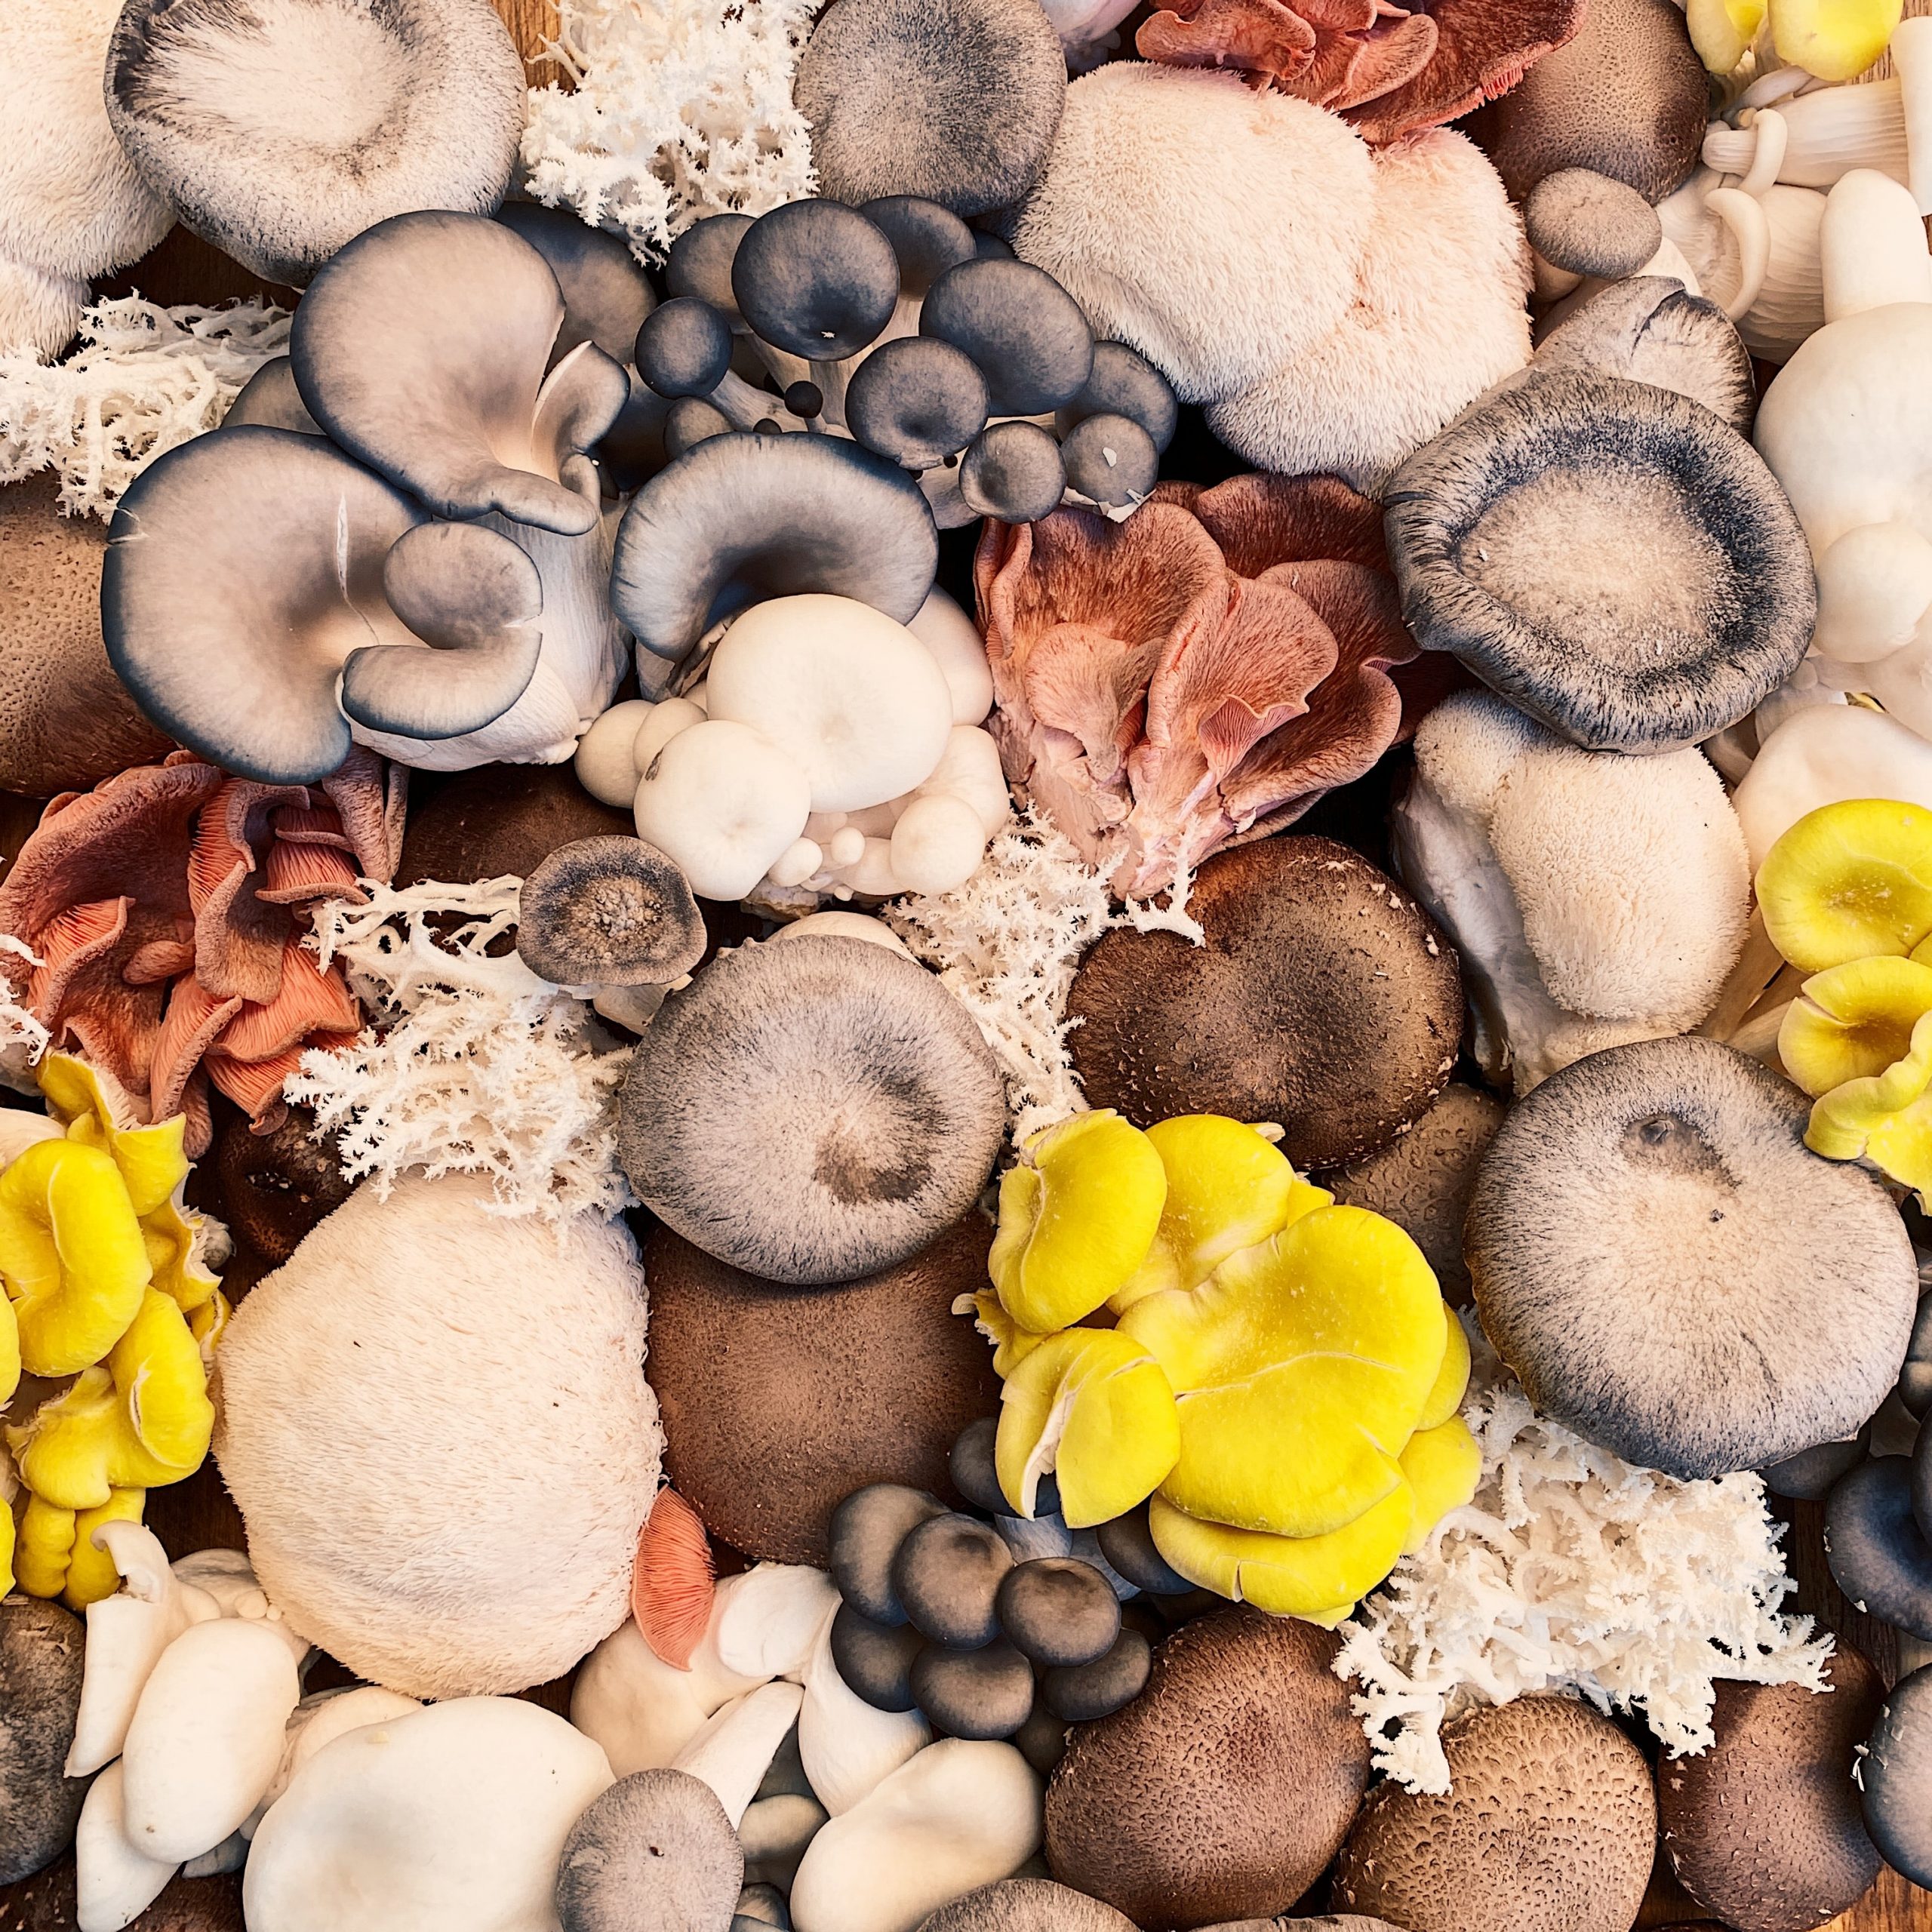 Are Mushrooms a Vegetable?…and Other Facts About Mushrooms